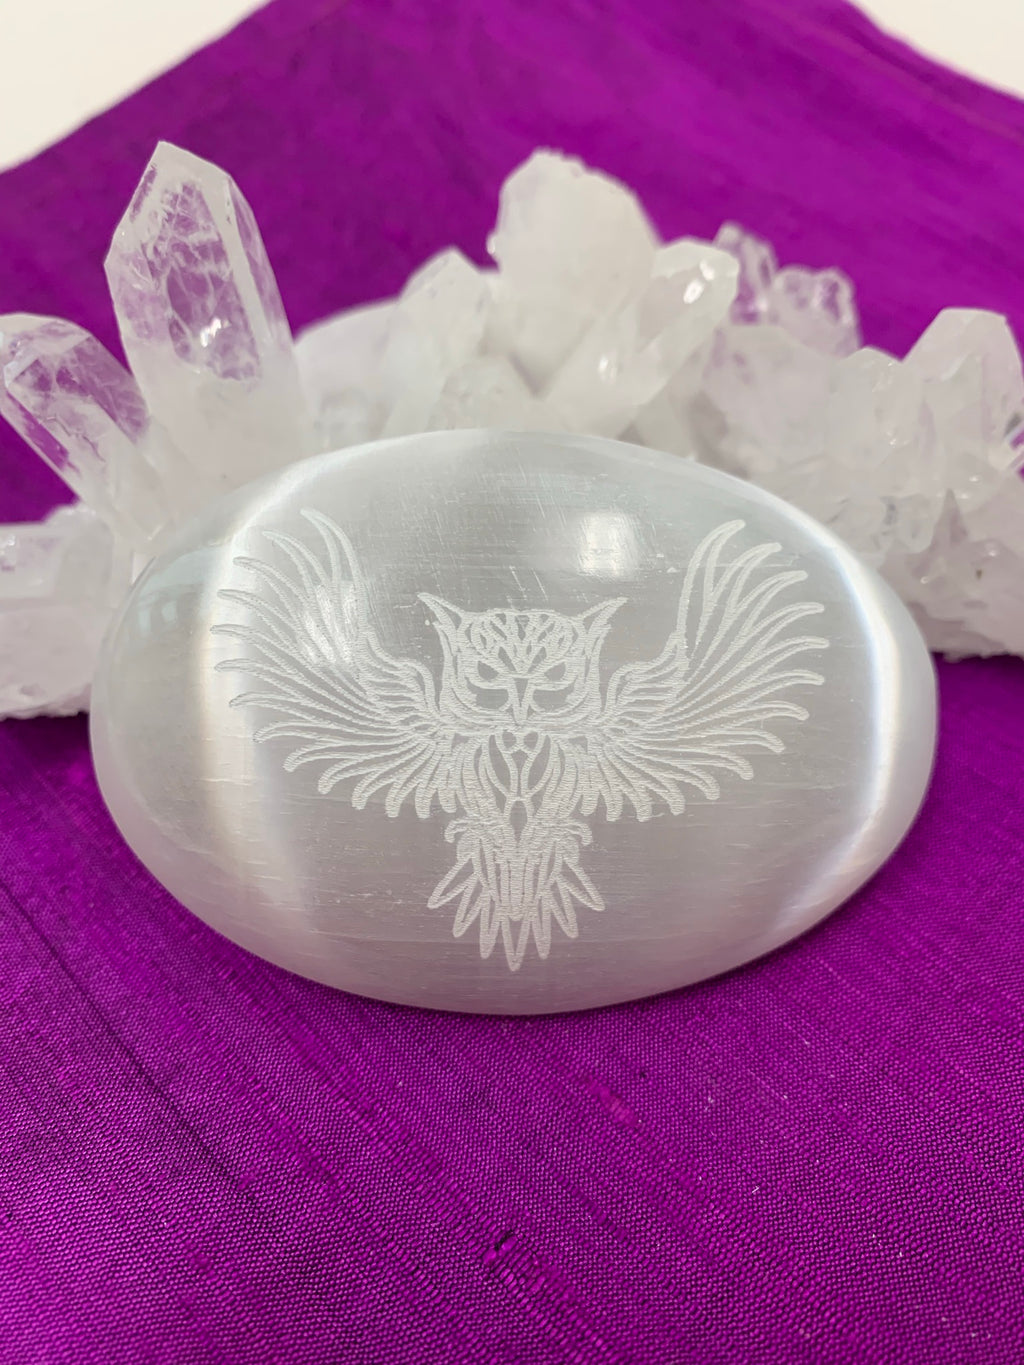 Owl etched on smooth, polished selenite palm stone from our Spirit Animal collection. Selenite ranges from translucent to milky white and is the perfect size to fit in your palm. Average weight is 4.2 oz and it is approximately 3"x2.5". This selenite is ethically sourced and workers receive living wages.